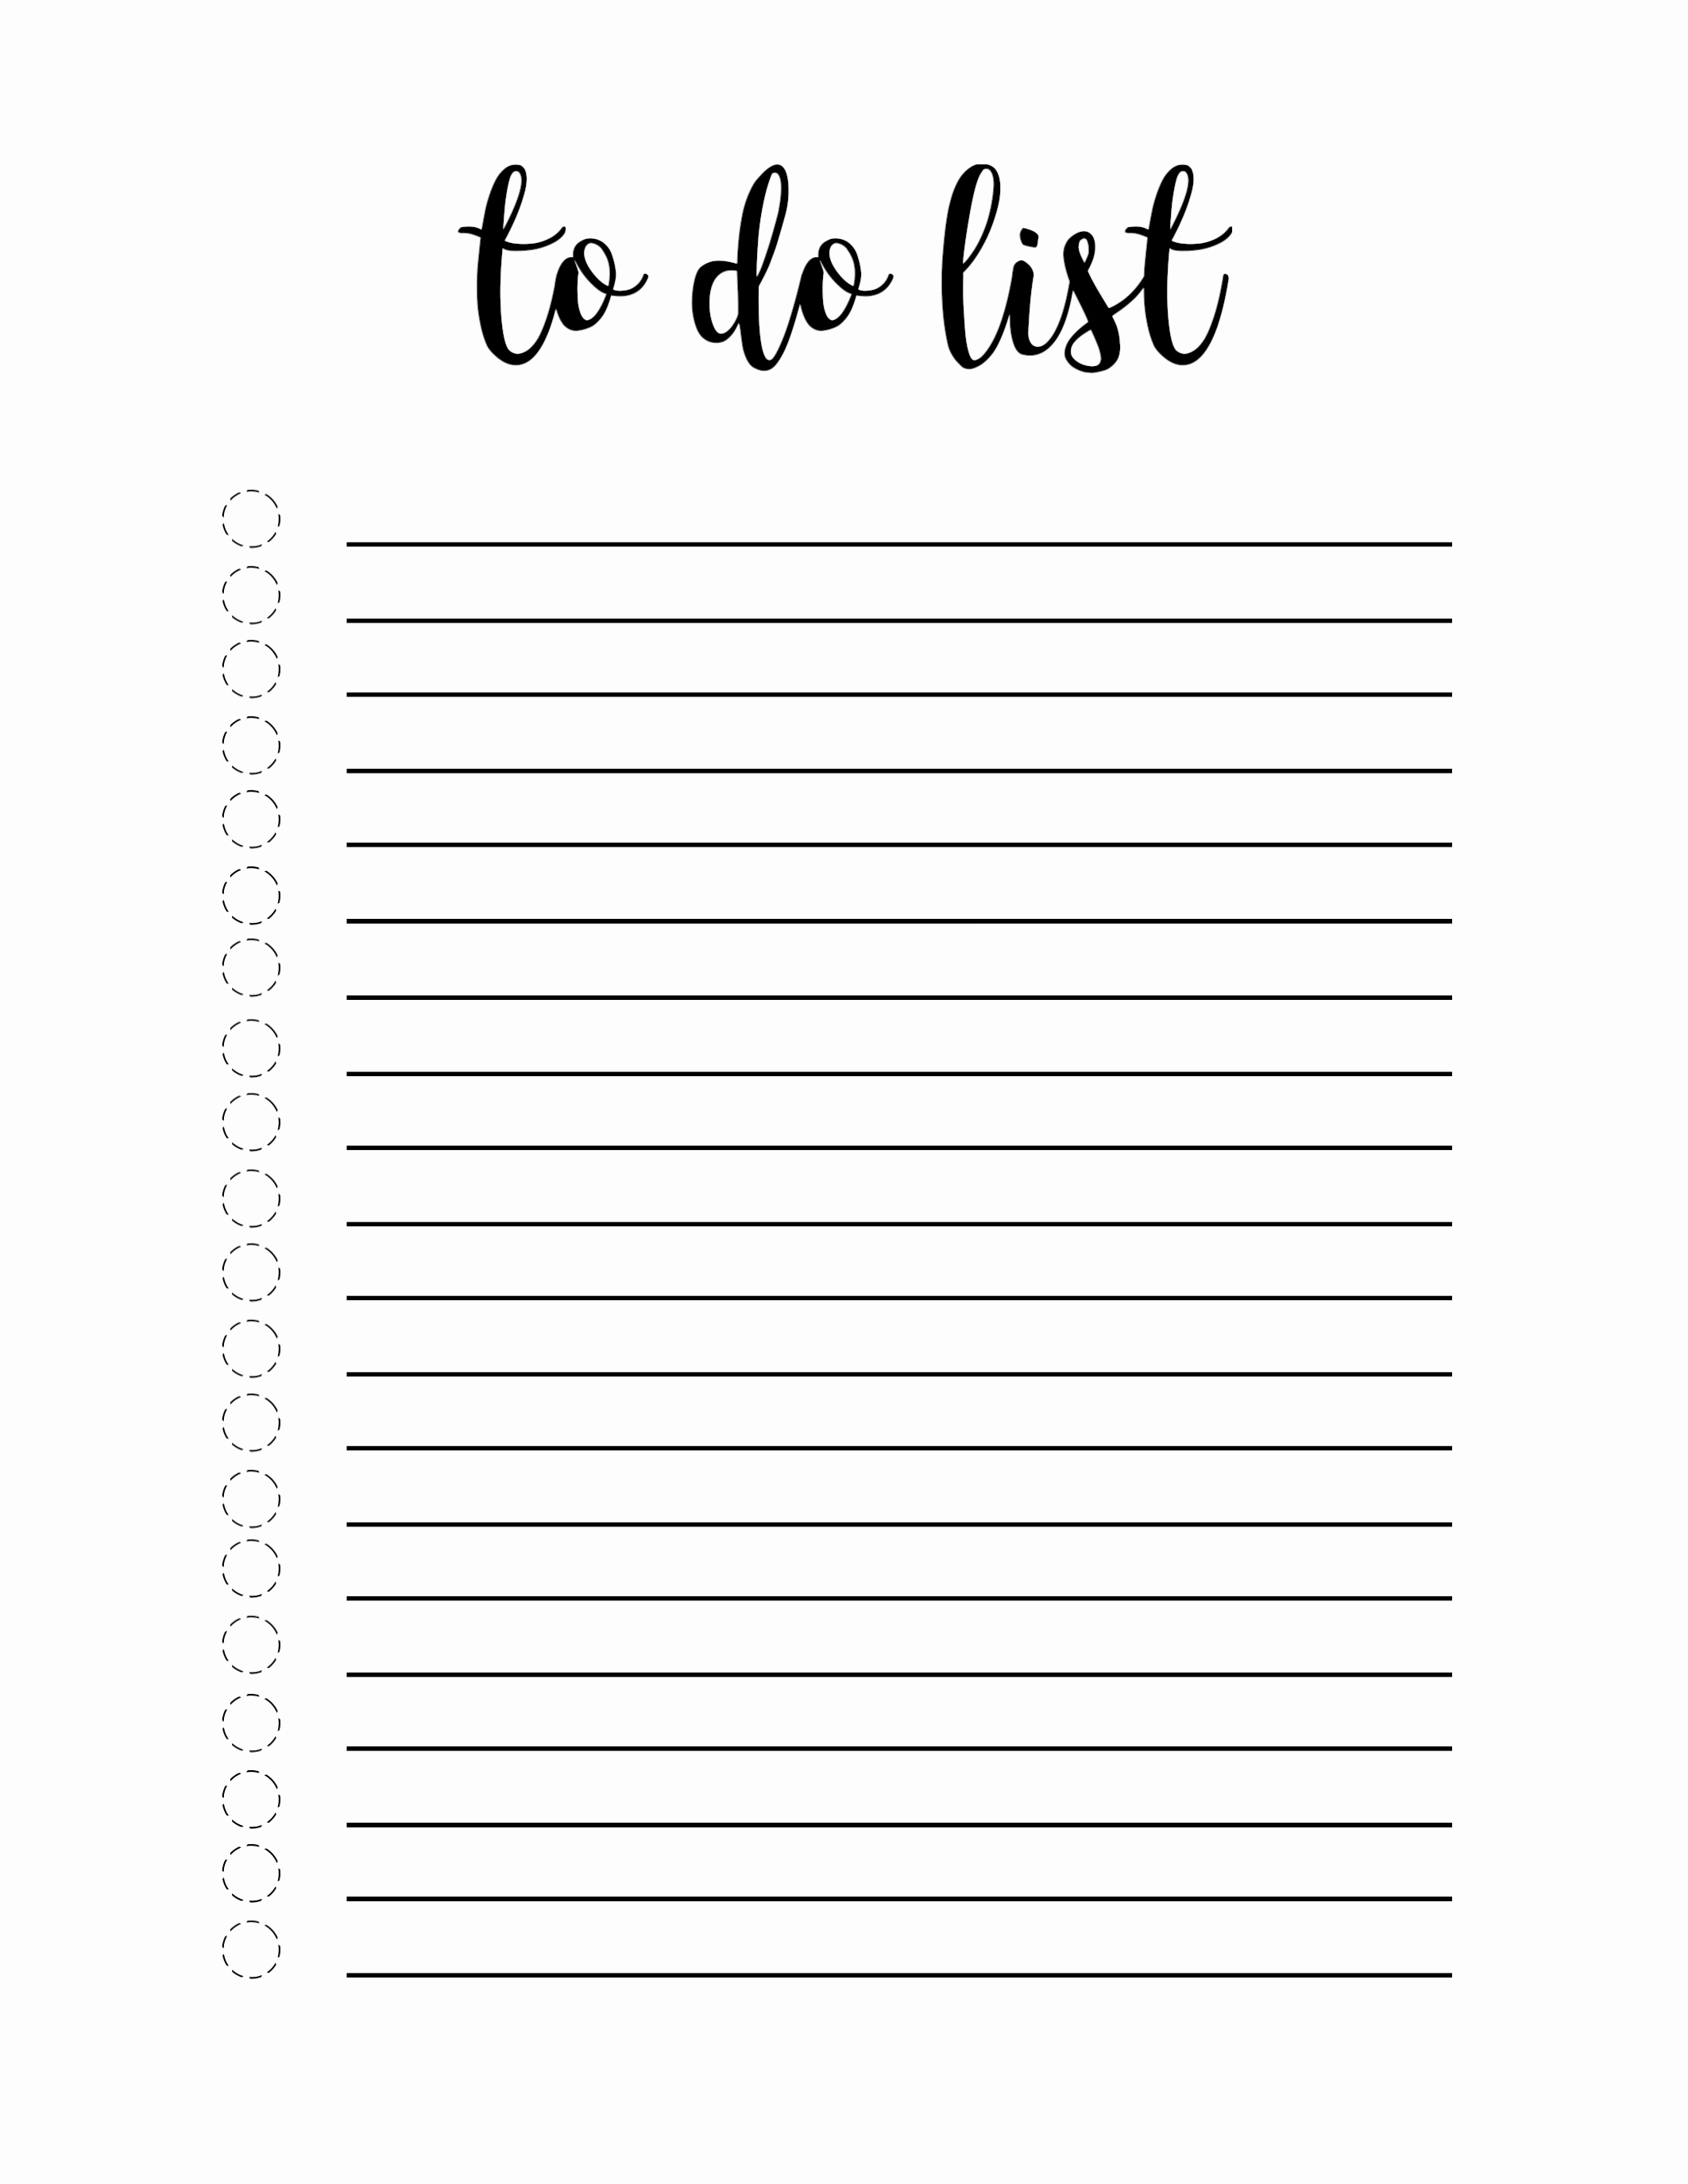 Daily todo List Template Elegant Free Printable to Do List Template Paper Trail Design